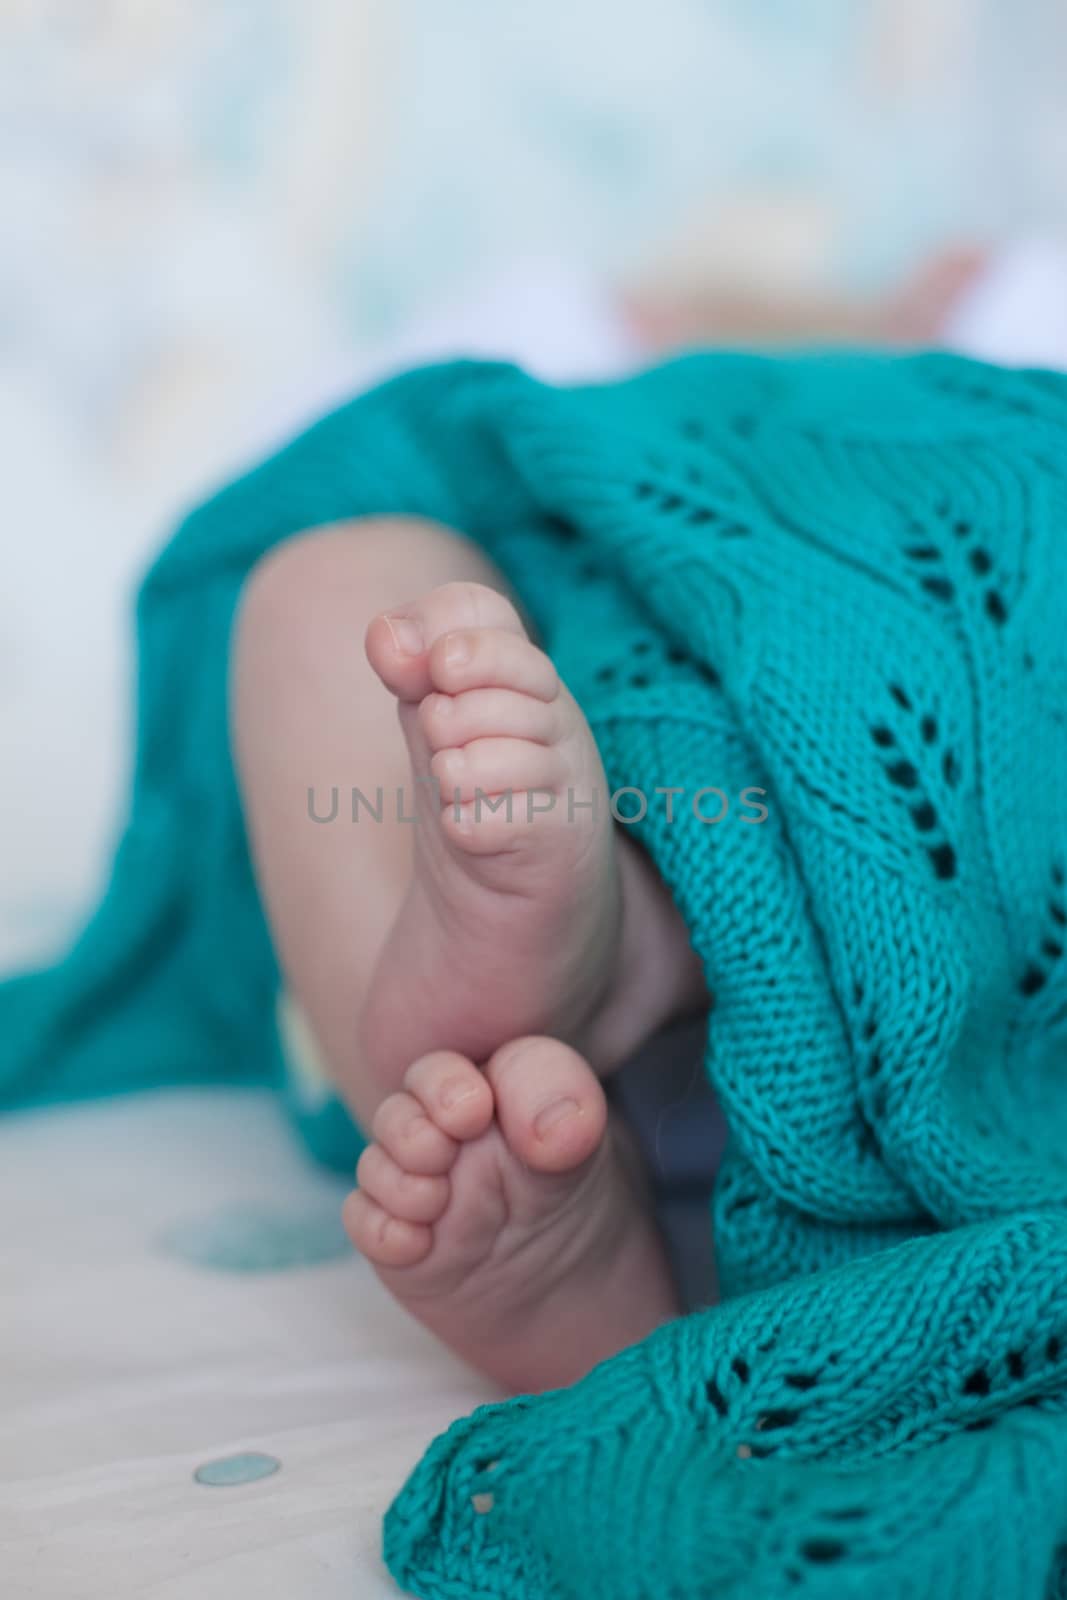 Babies cute small heels feet over the turquoise knitted blanket. Selective focus. by Katia1504